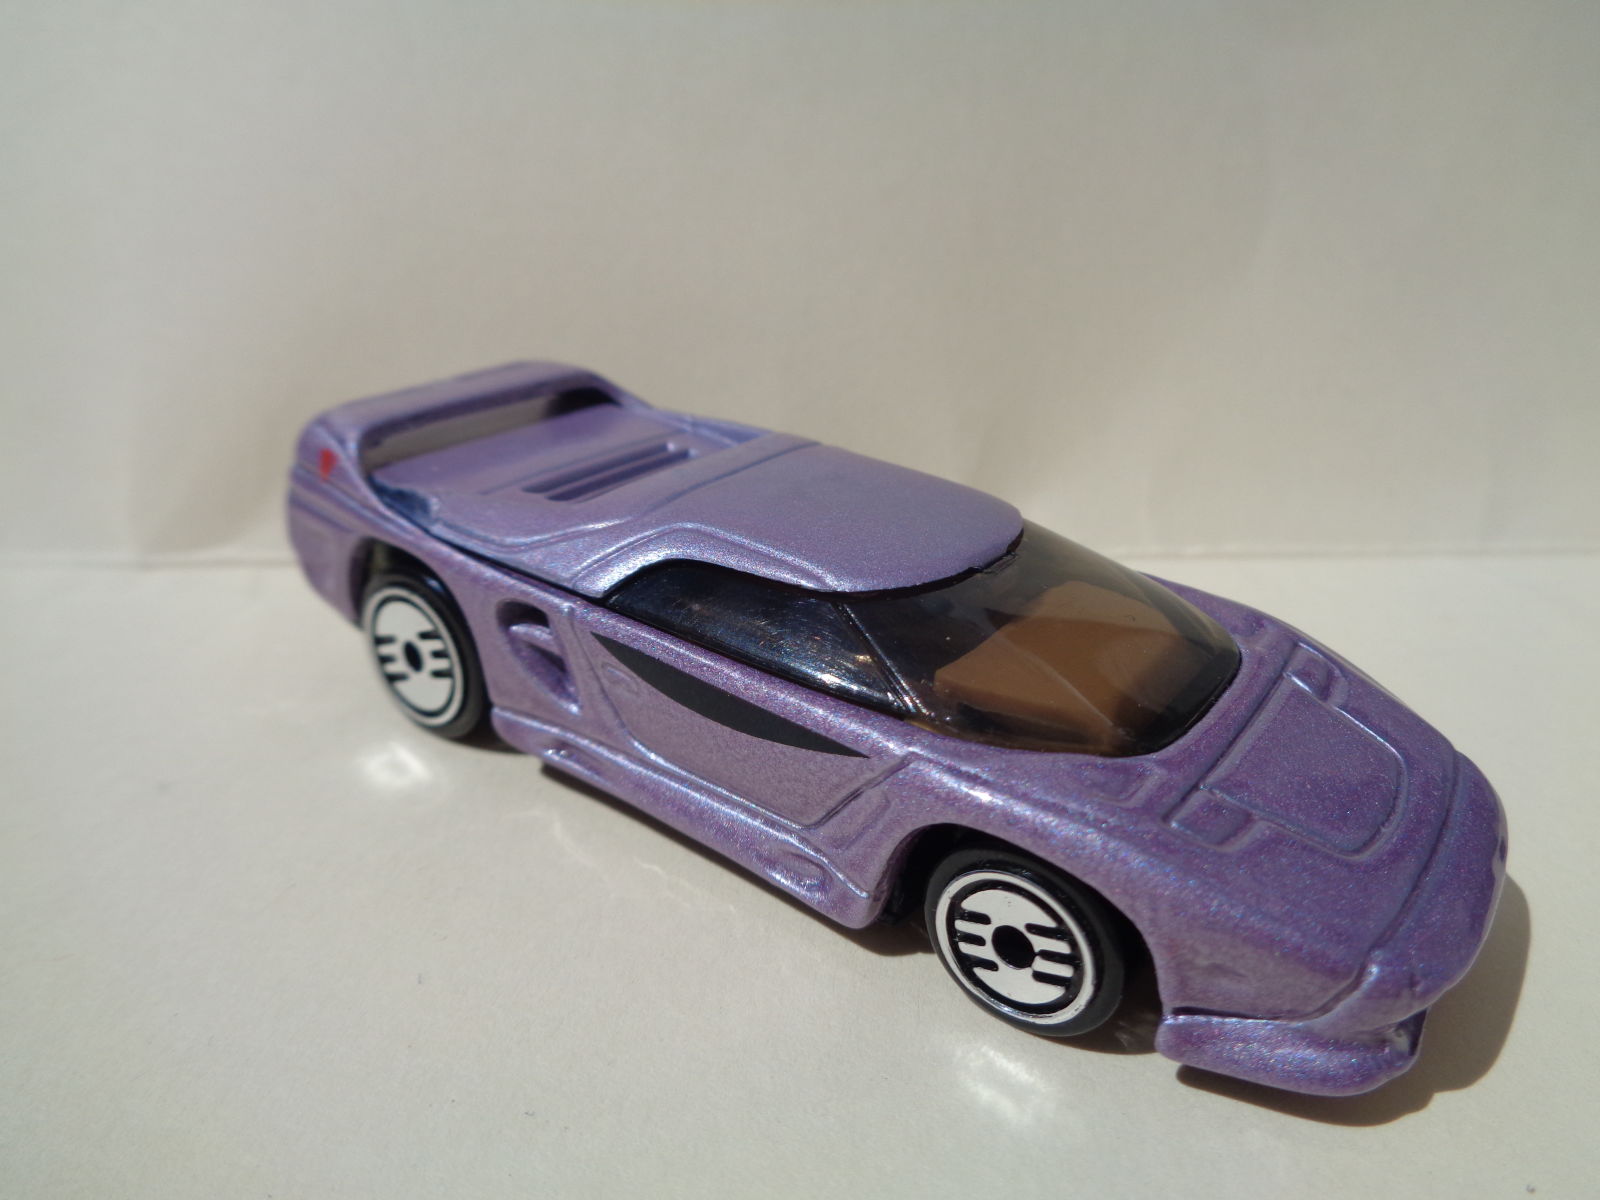 Illustration for article titled VECTOR W8 / VECTOR W8 CONVERTIBLE (CUSTOM) - BY HOT WHEELS